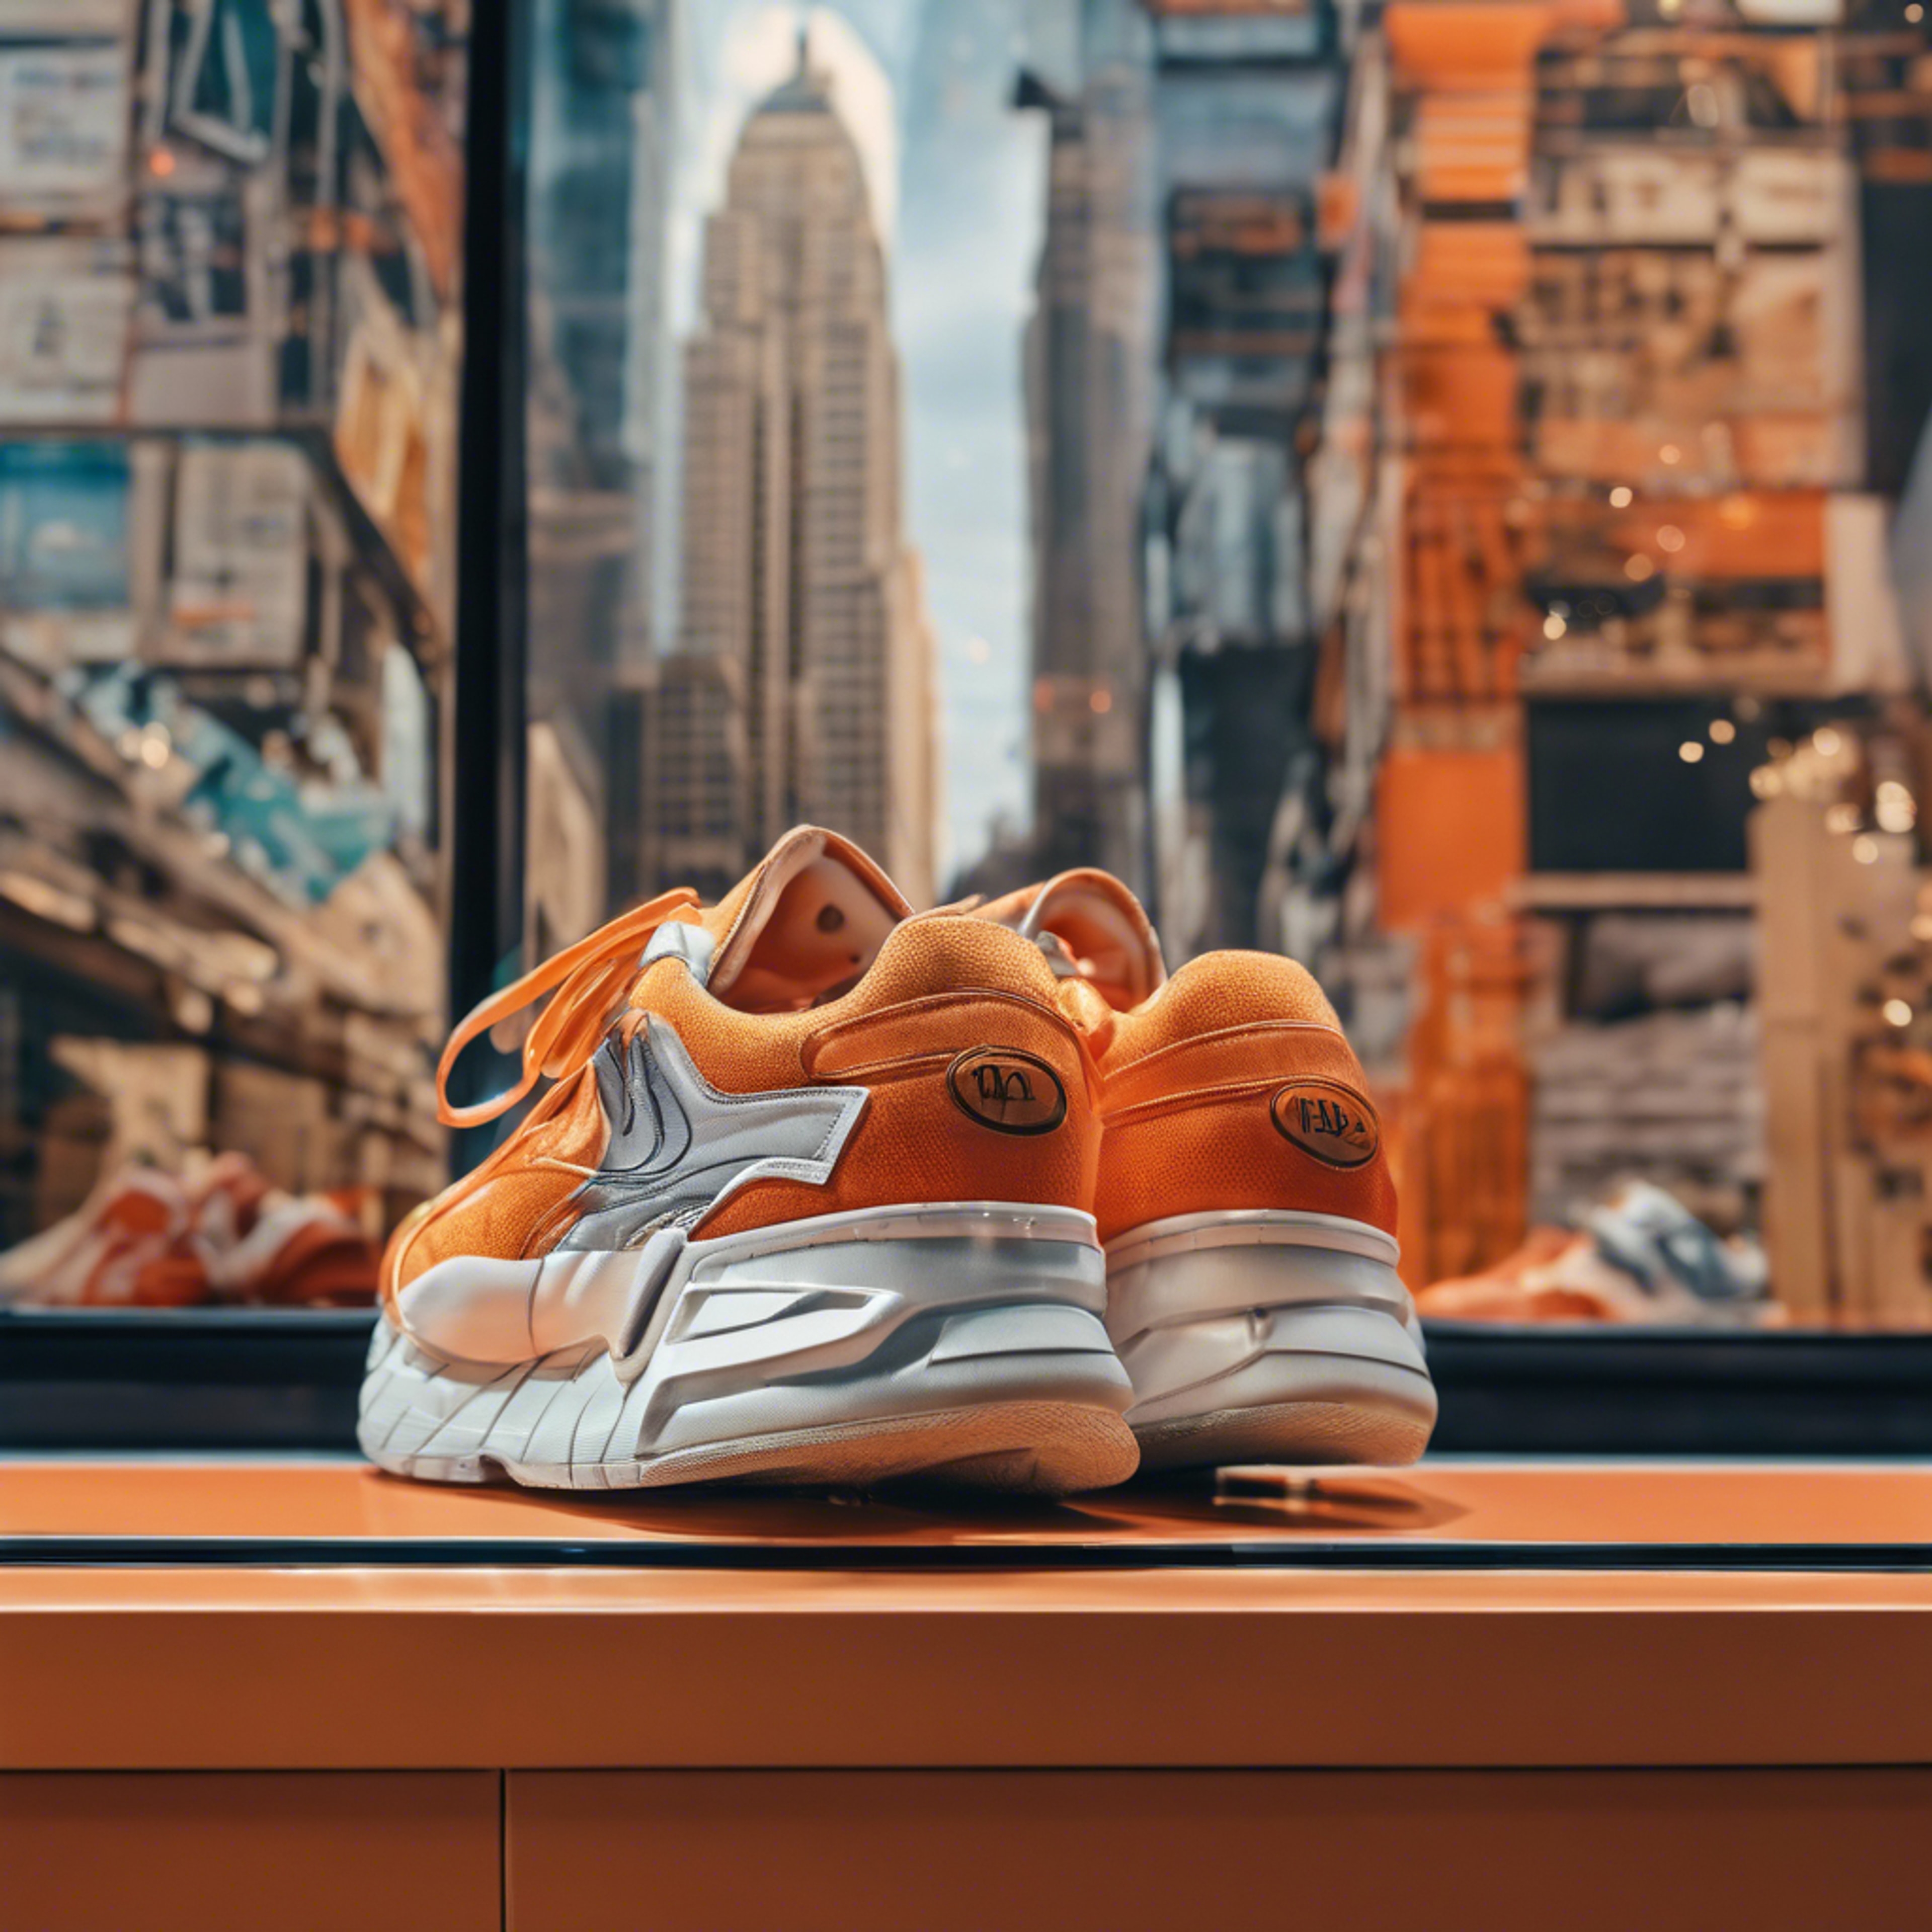 Orange Y2K-inspired sneakers displayed in a shoe store window with a retro cityscape backdrop. Tapet[c42ef01953ac4184b365]